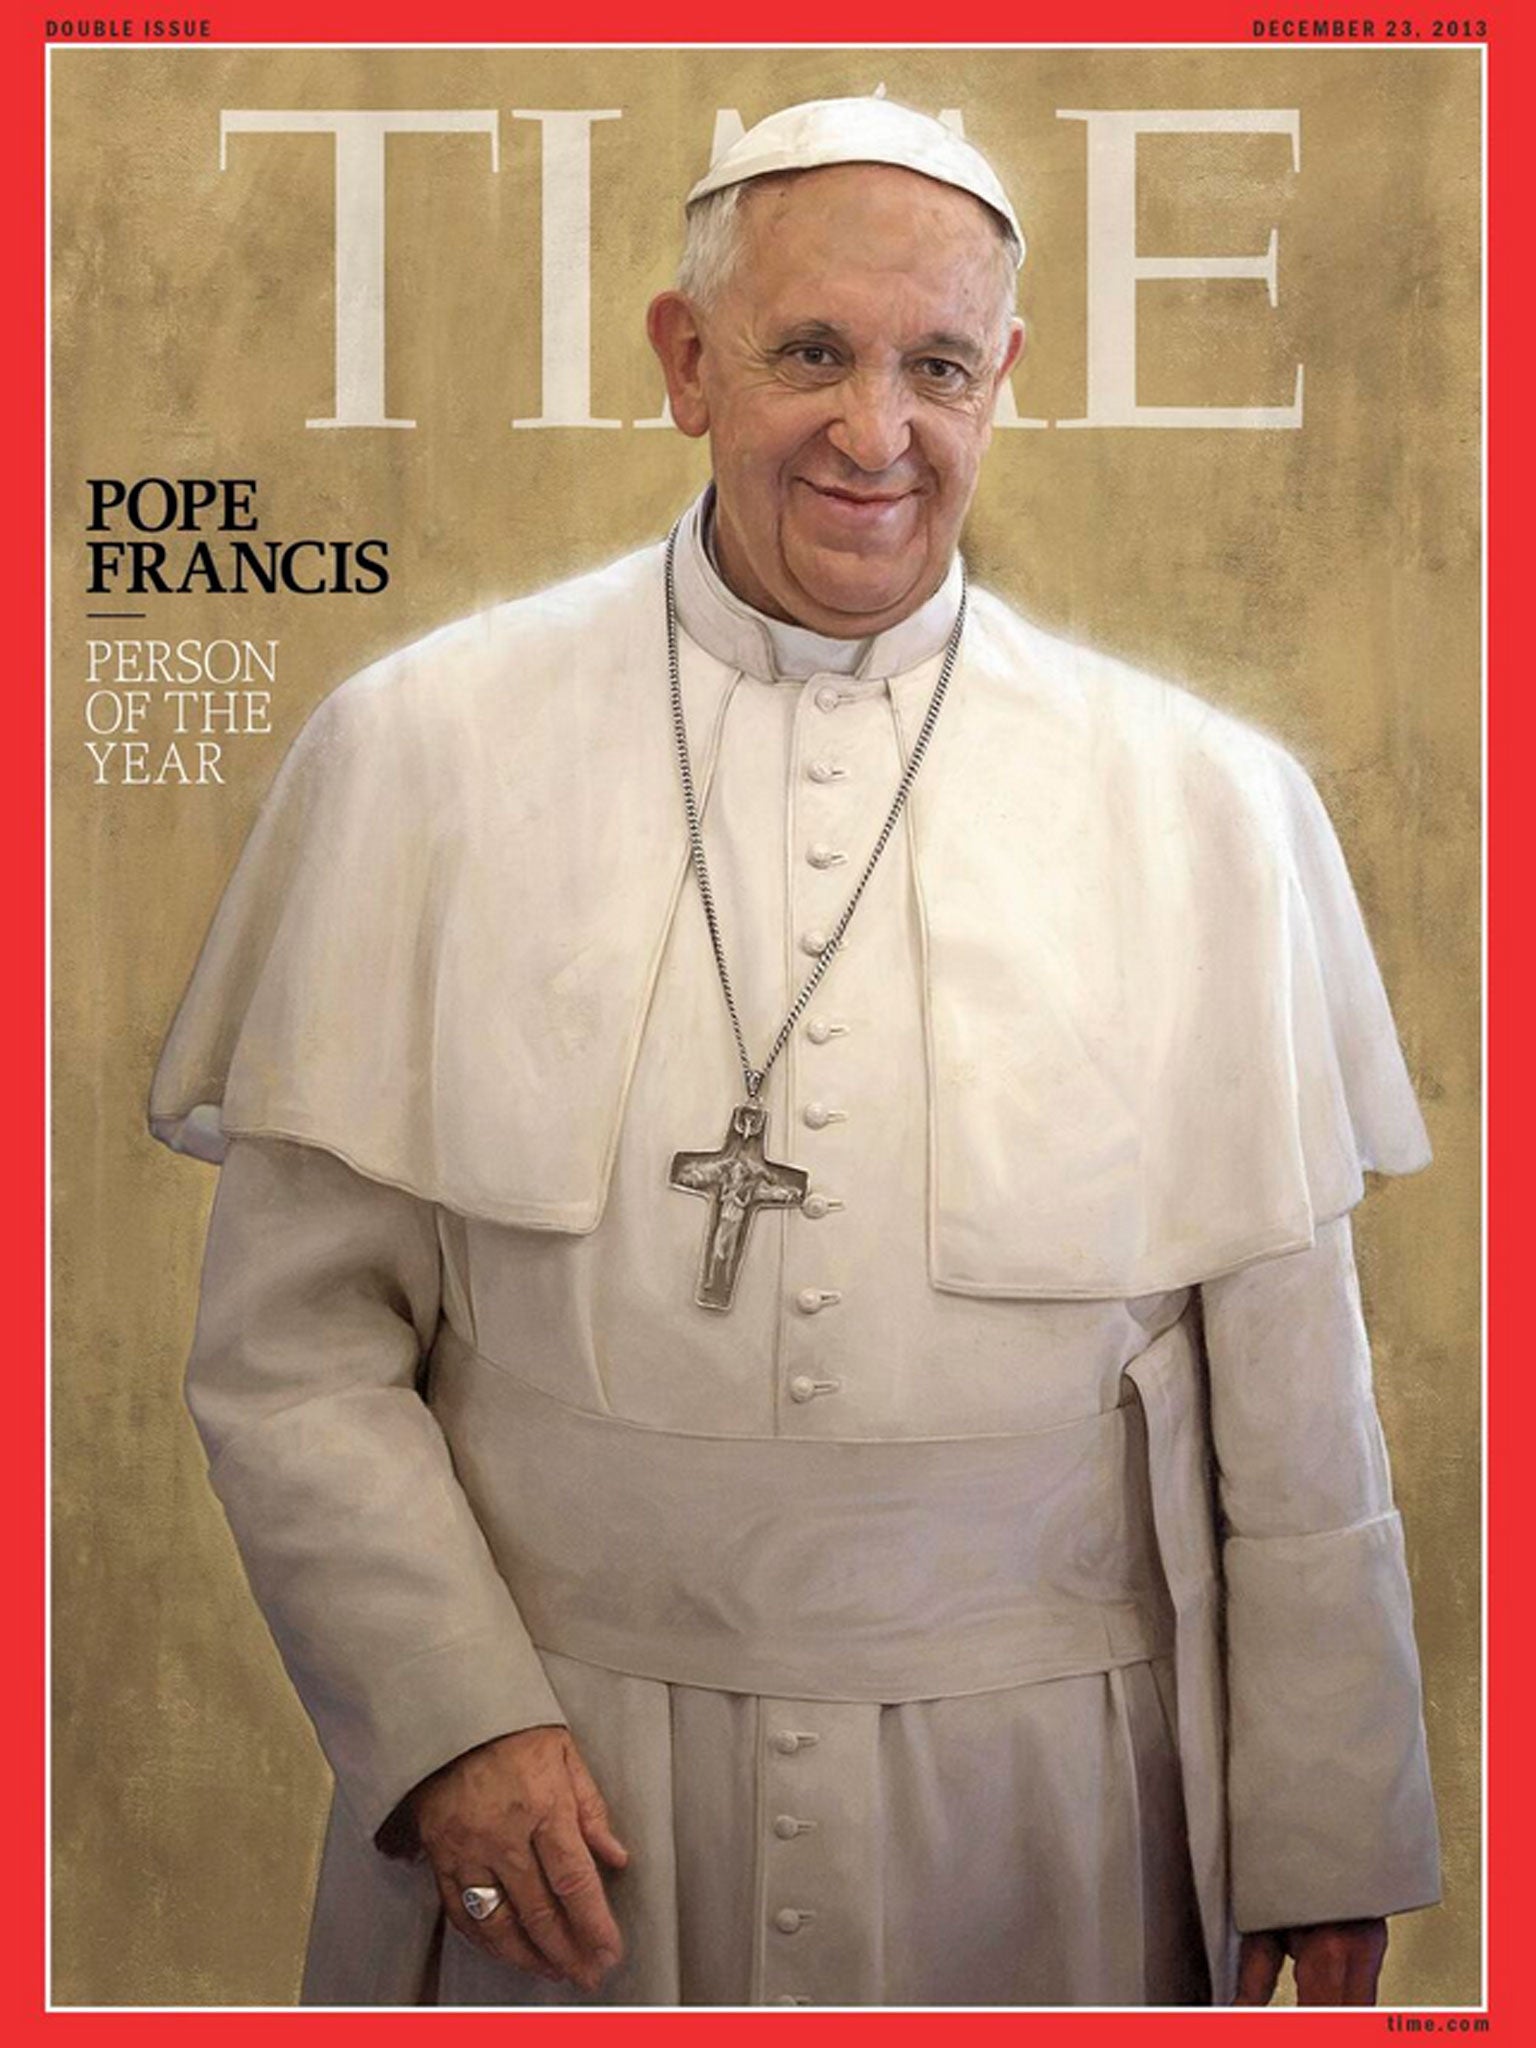 Pope Francis was named Time magazine's Person of the Year in 2013